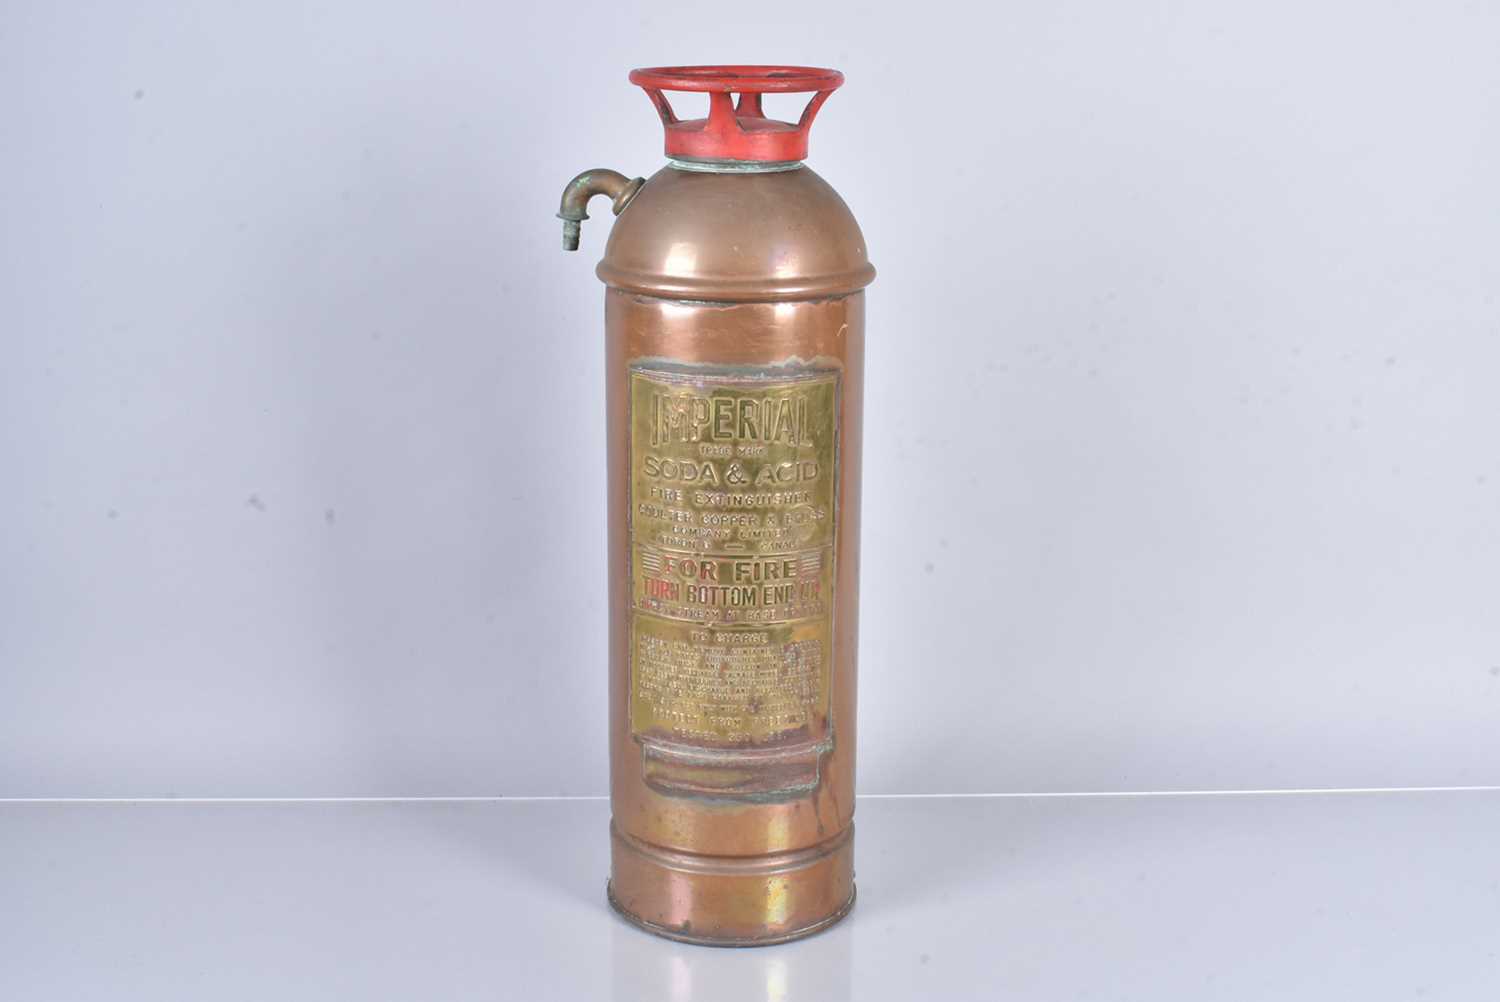 Lot 51 - An Imperial Soda & Acid Fire Extinguisher by Coulter Copper & Brass Company Limited